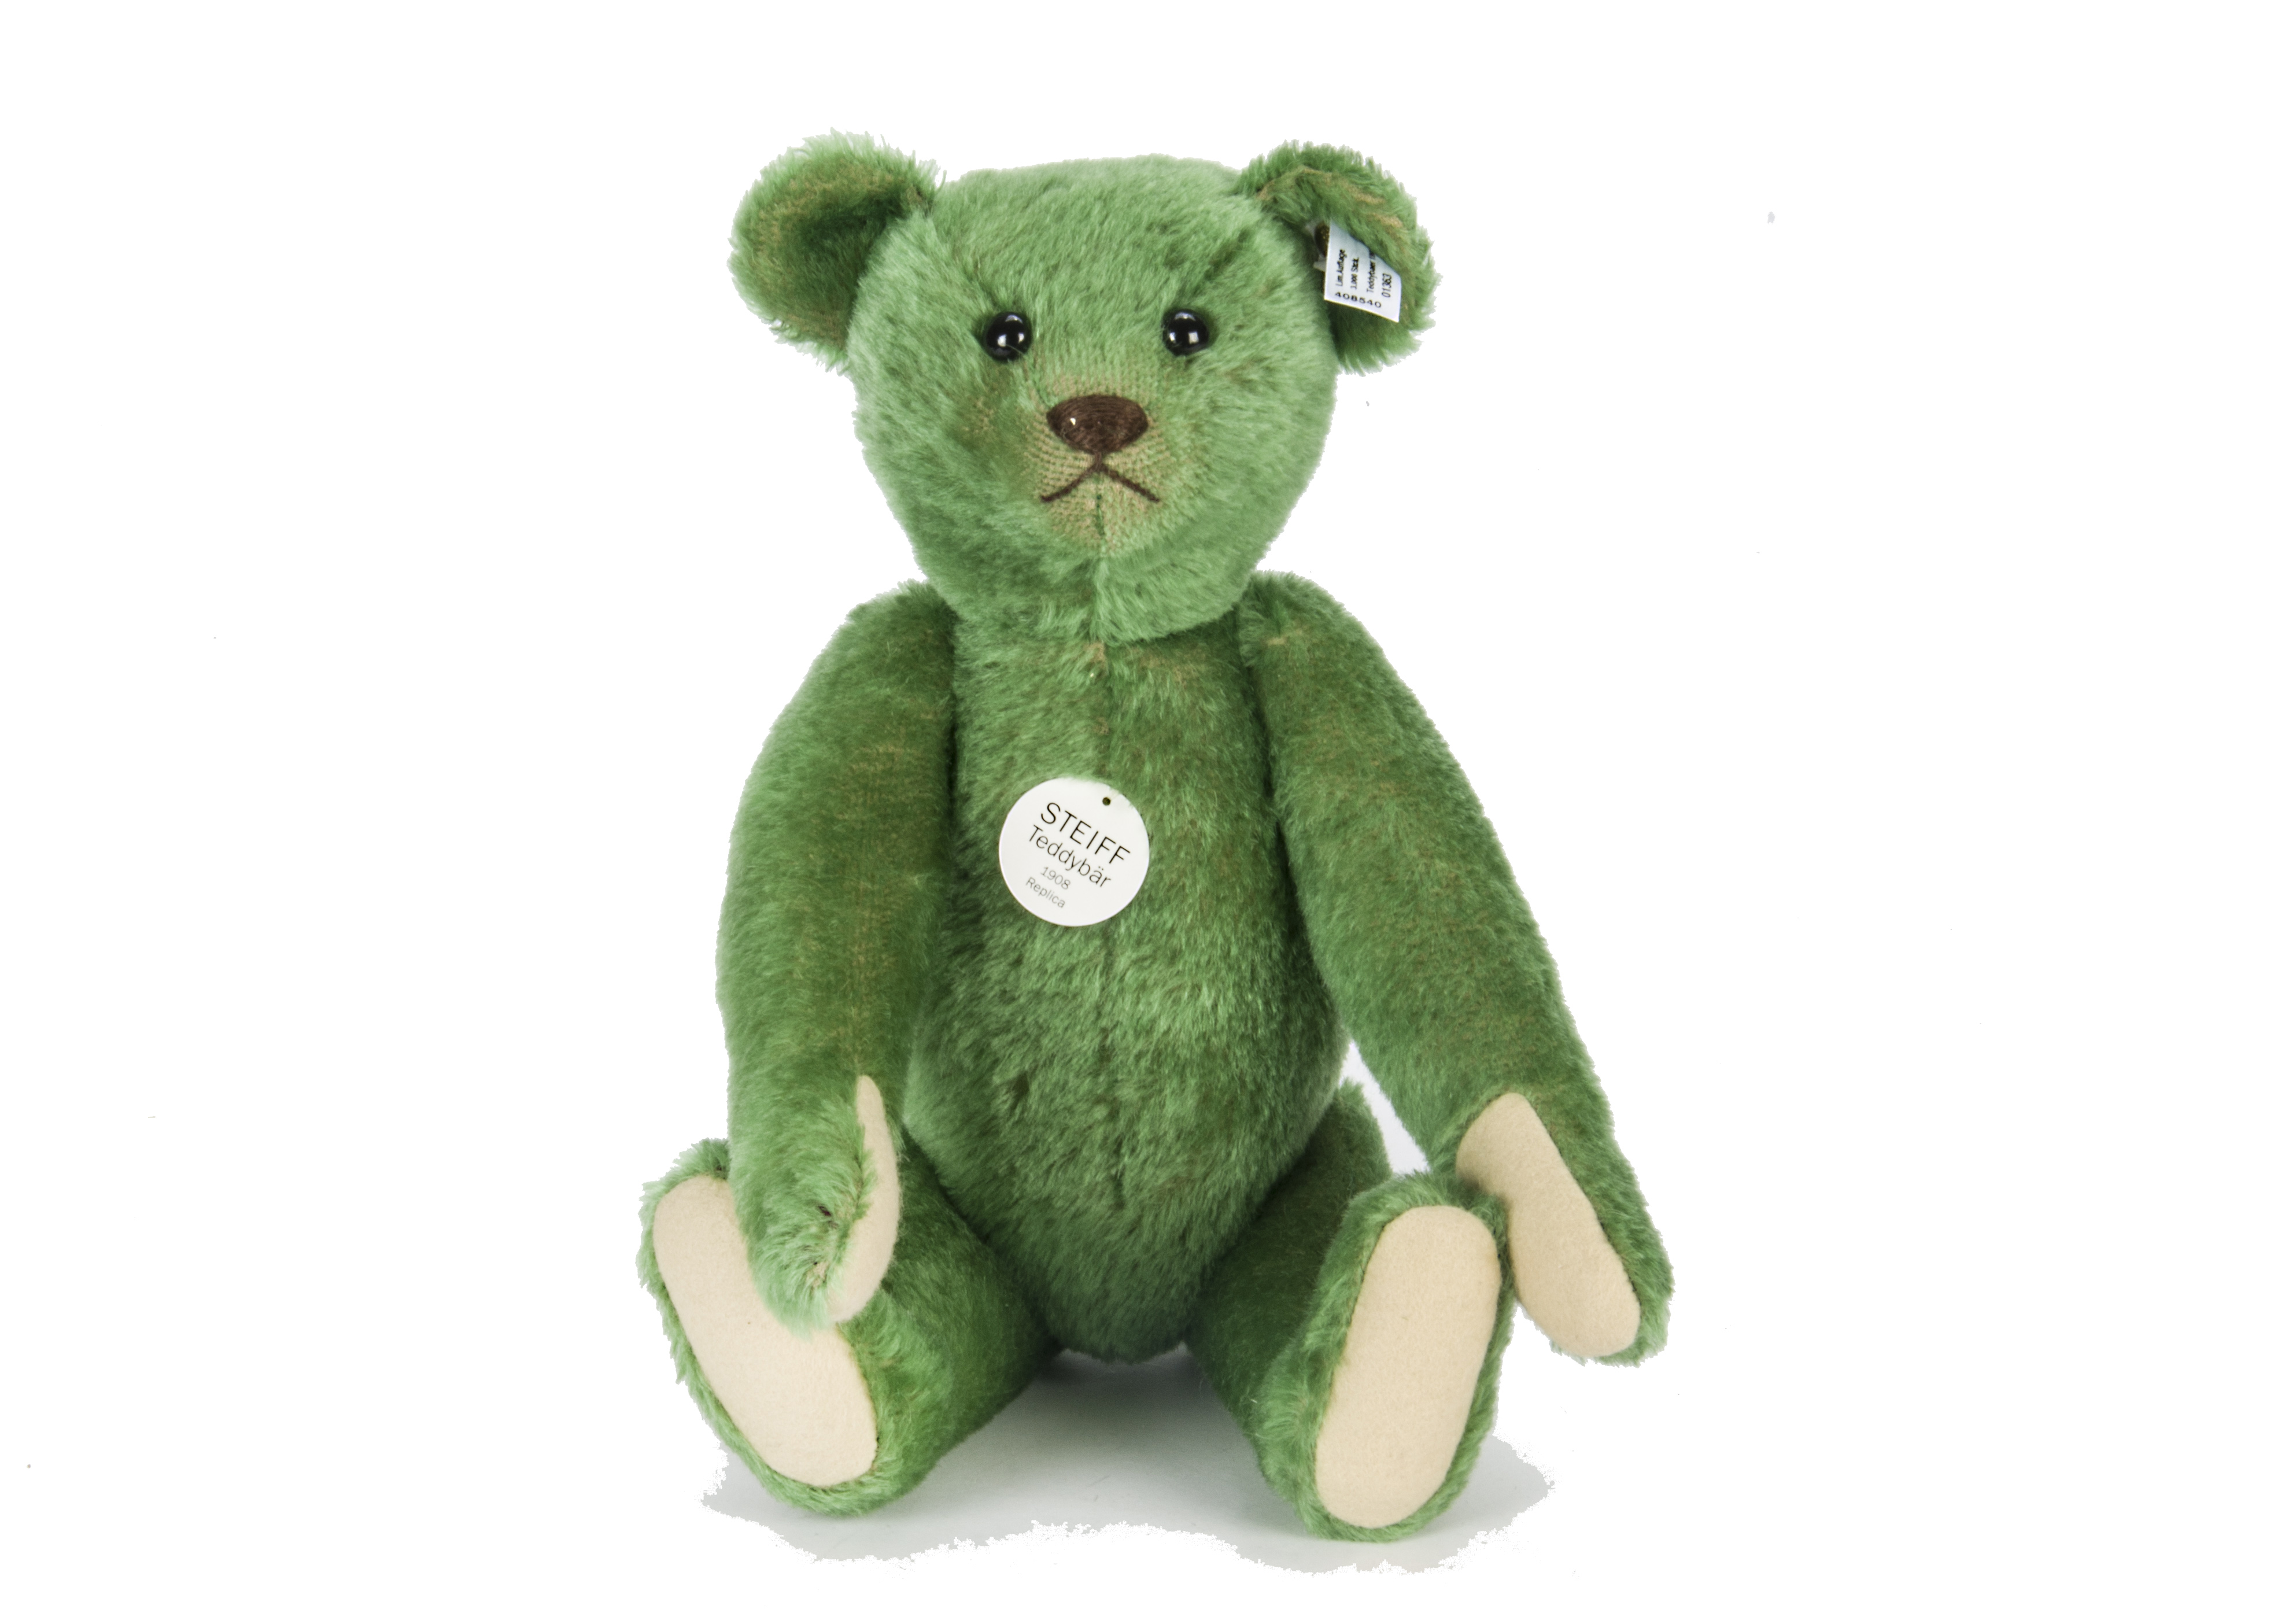 A Steiff Limited Edition green Teddy Bear 1908, 1363 of 3000, in original box with certificate,